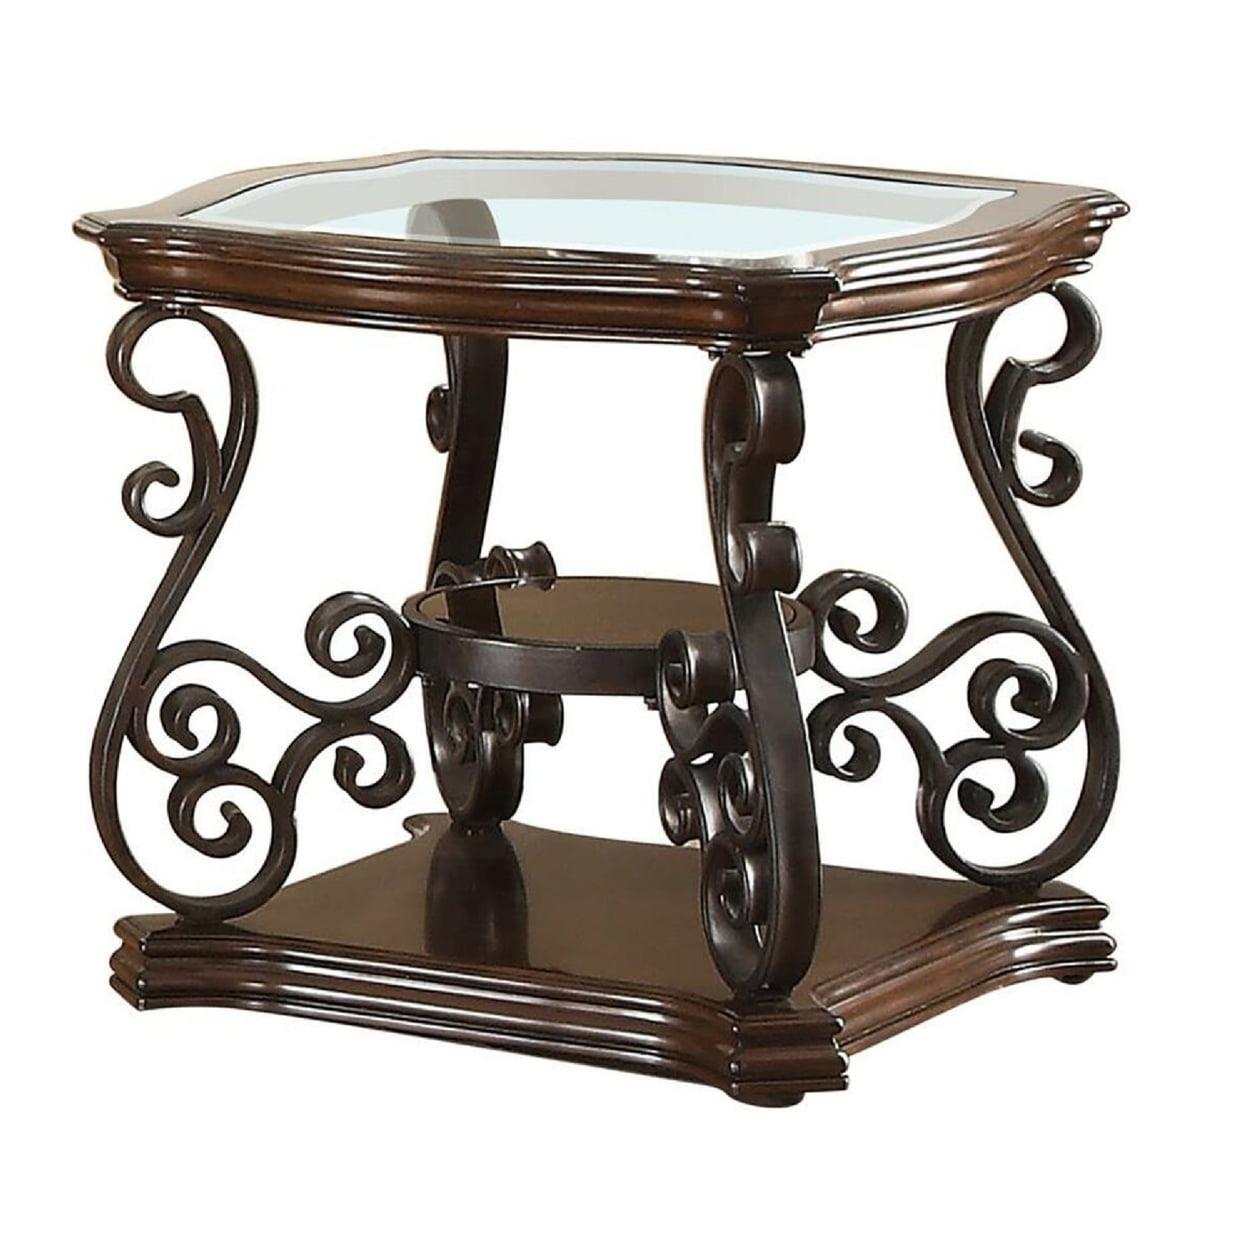 Elegance Merlot 26" Square Wood and Metal End Table with Glass Top